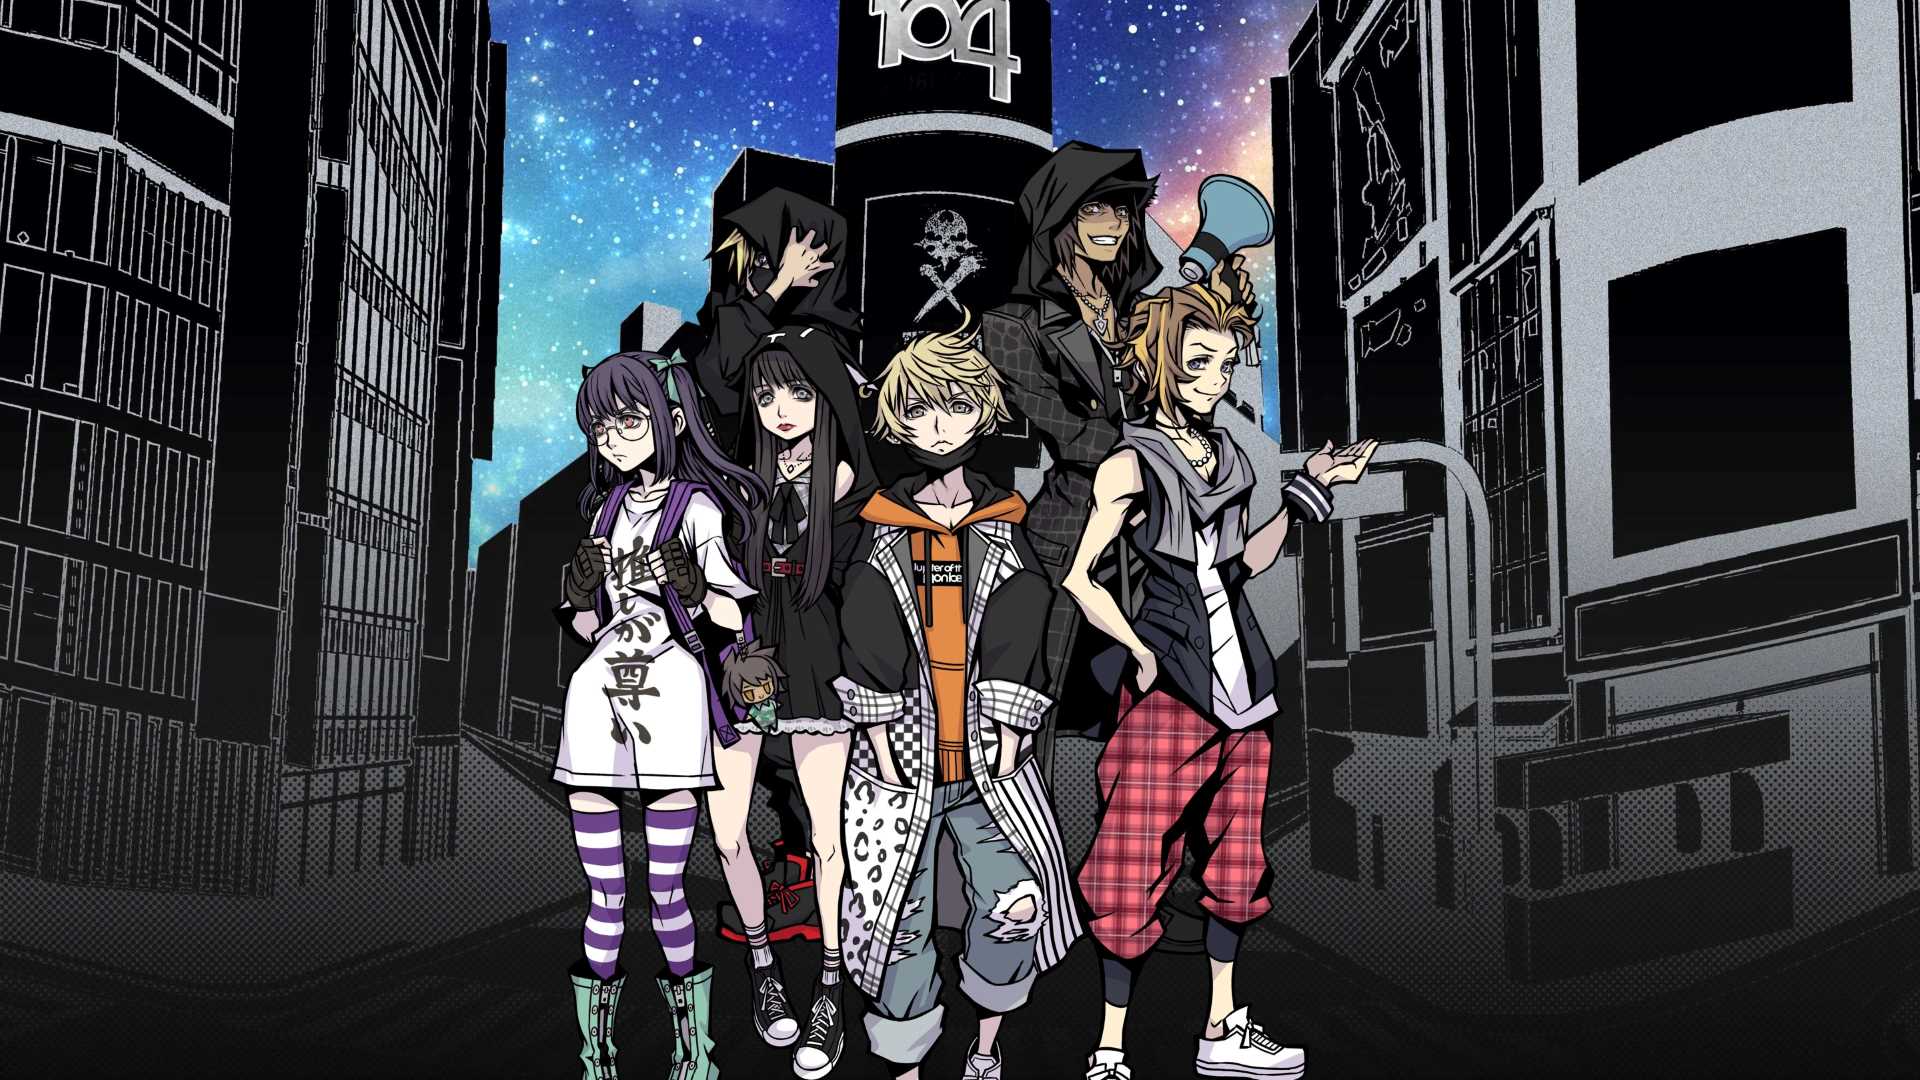 NEO: The World Ends with You - Action RPG announced - Archyde